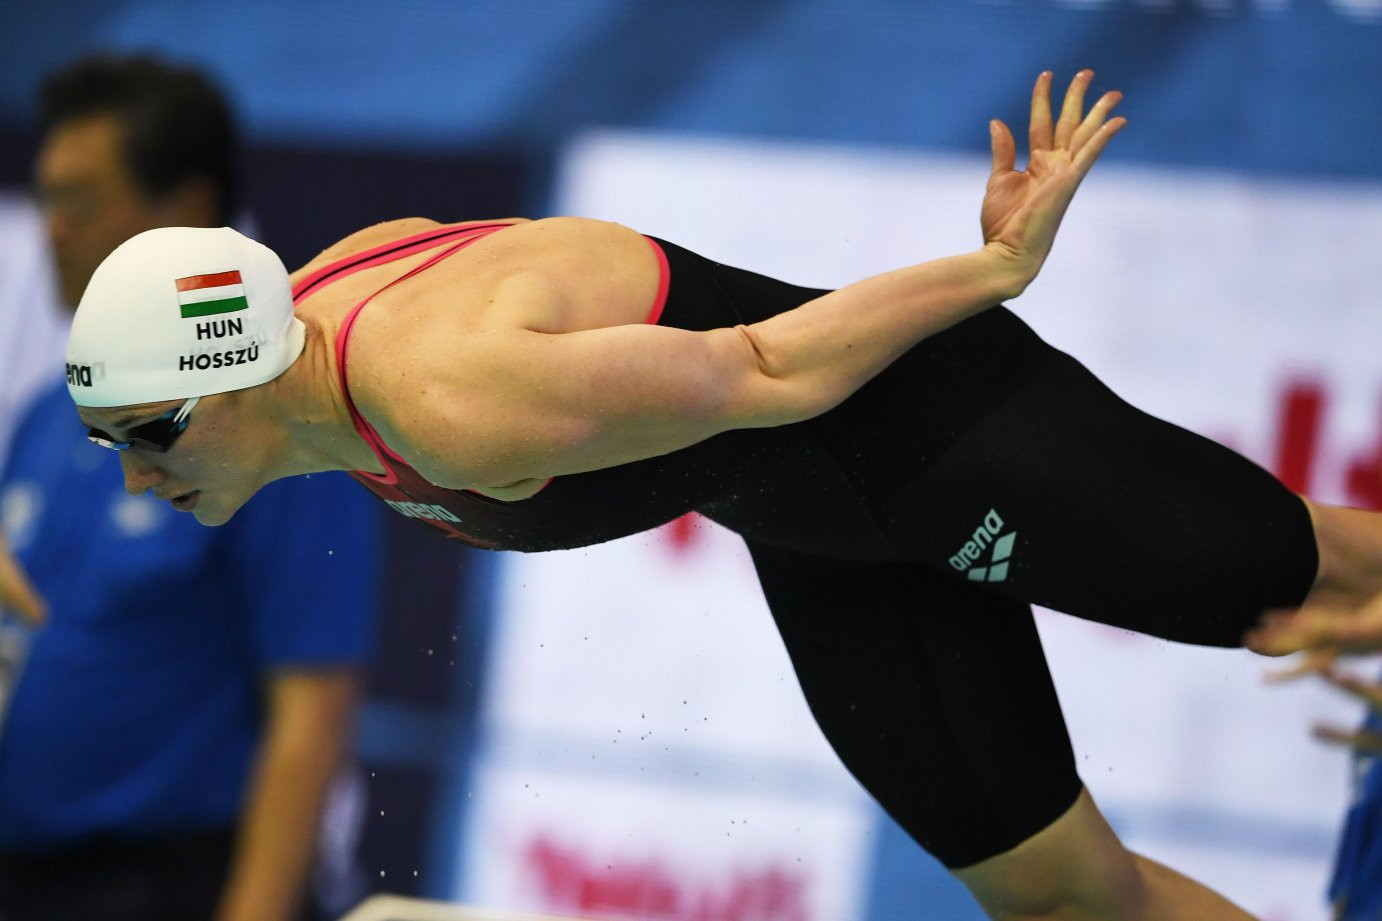 Katinka Hosszu of Hungary won the latest match-up with her perennial rival Sarah Sjostrum at the FINA World Cup in Tokyo ©FINA